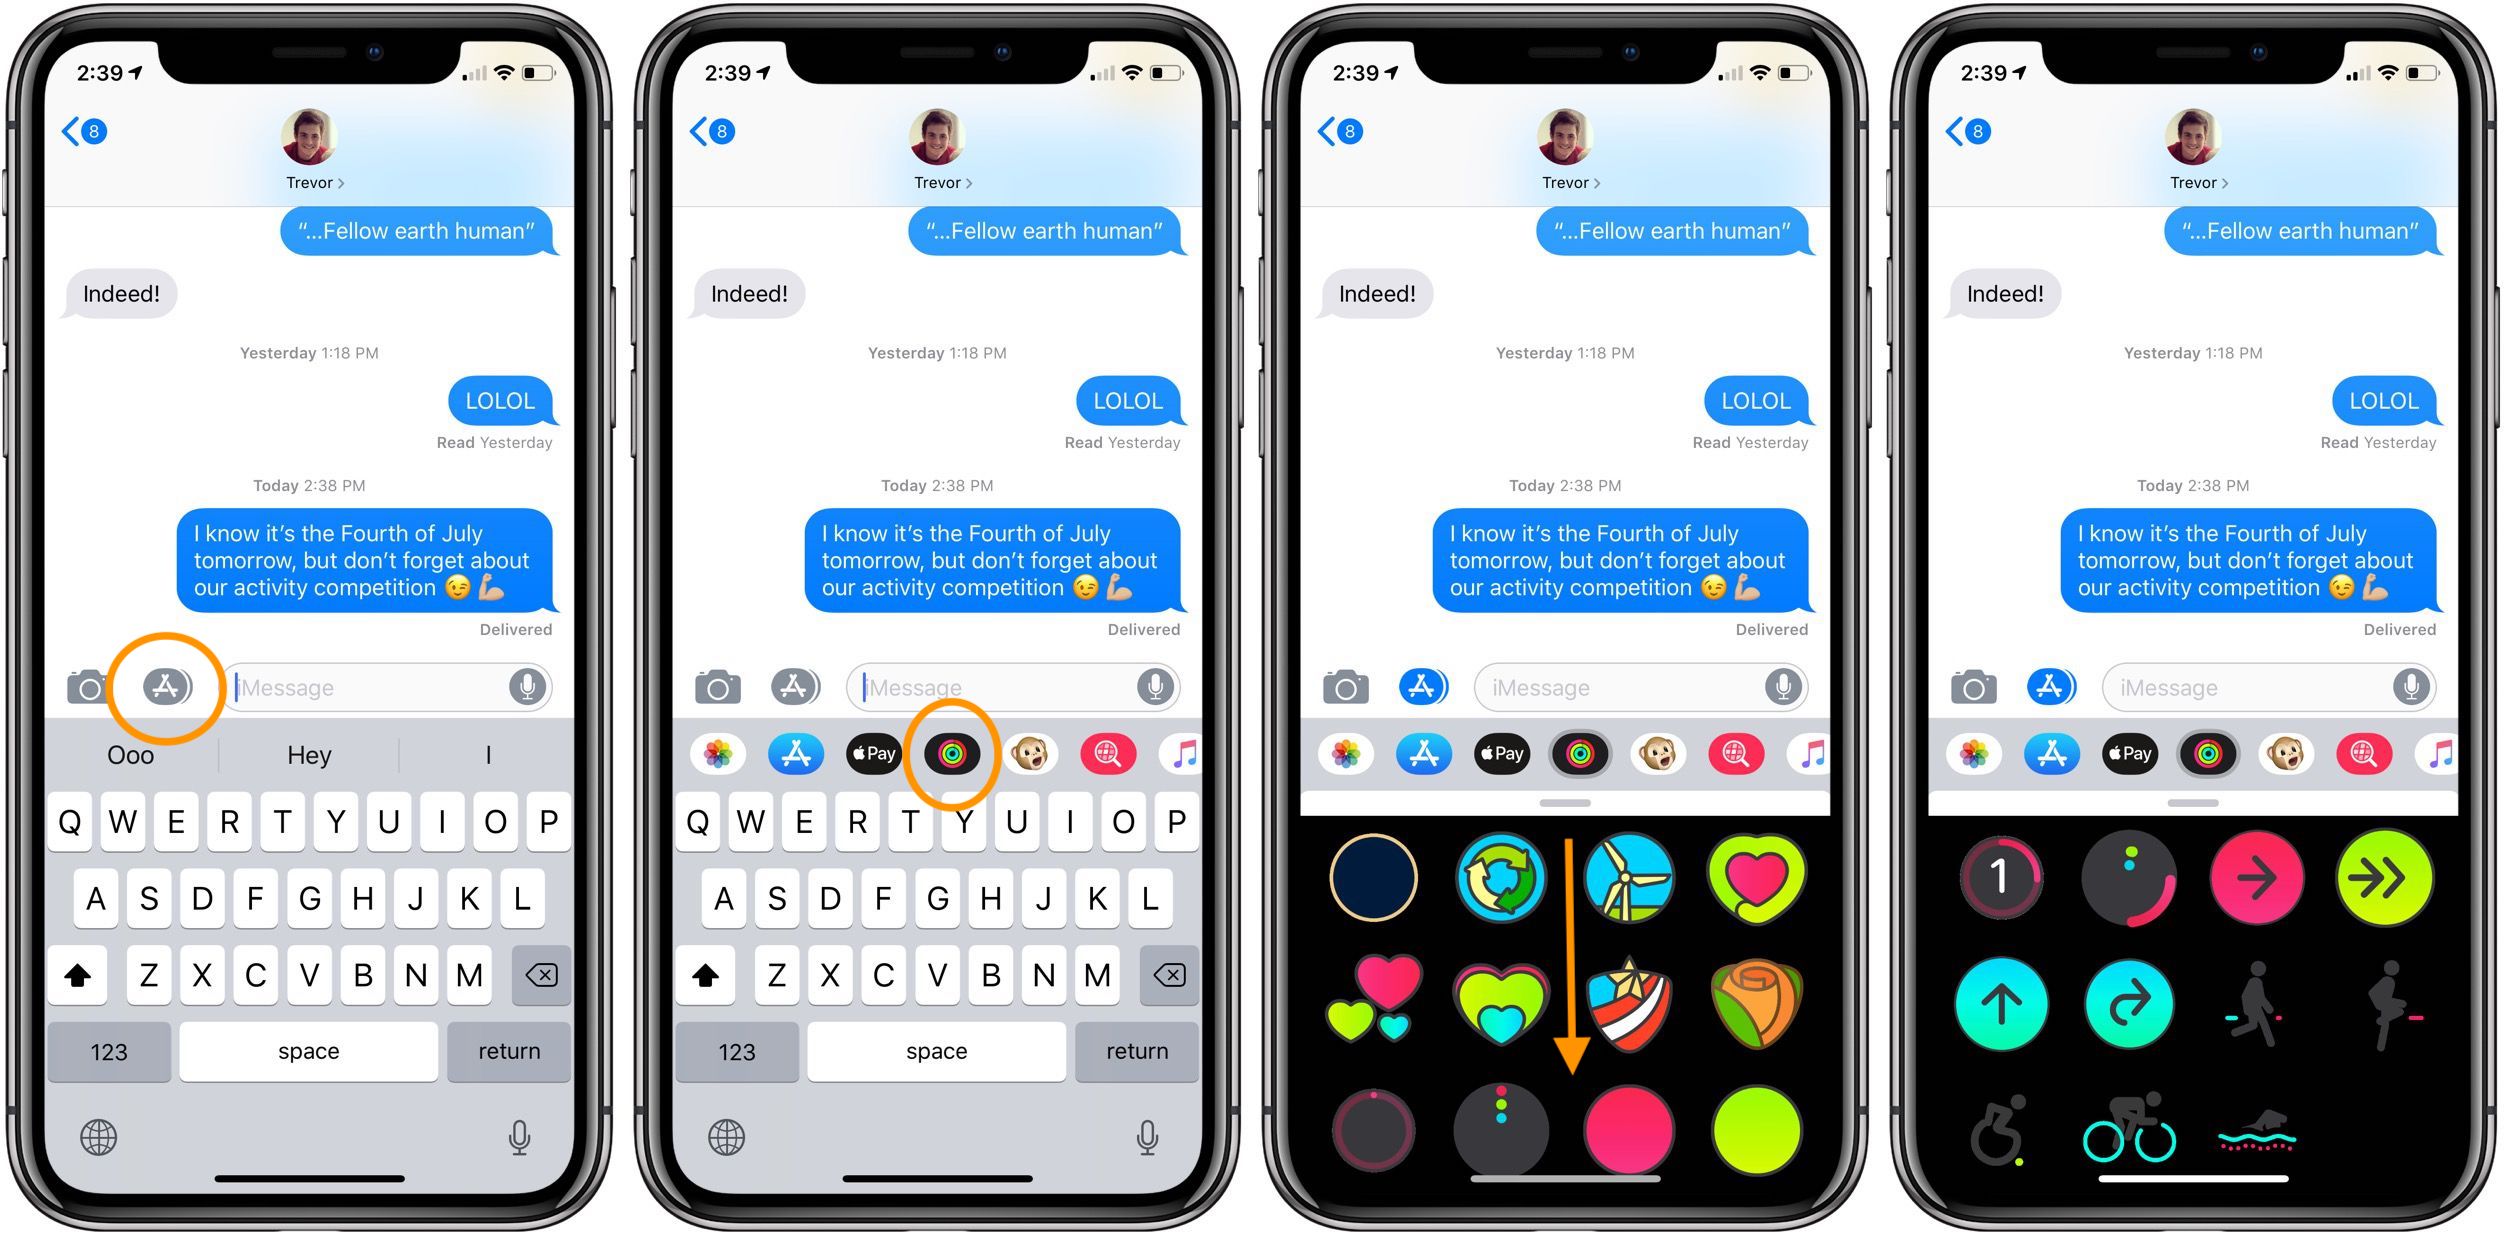 IOS 12 How To Use The Animated Activity App Stickers In Messages